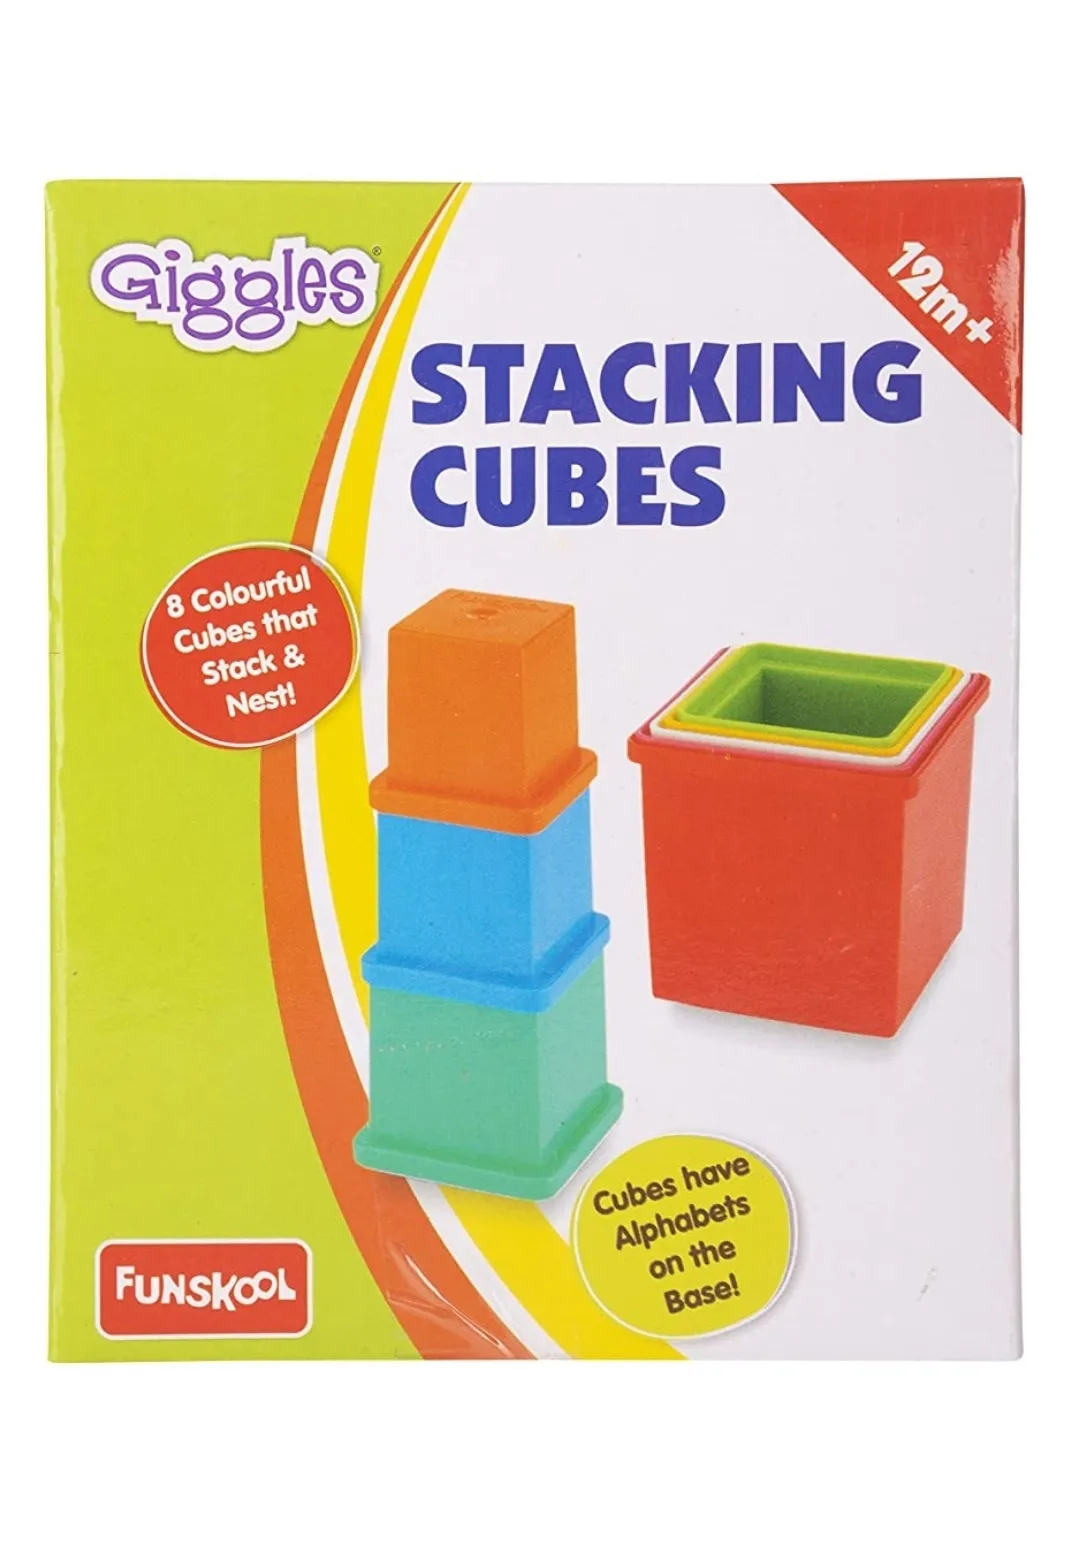 Funskool Giggles Stacking Cubes Multi Colour 8 Colourful Cubes